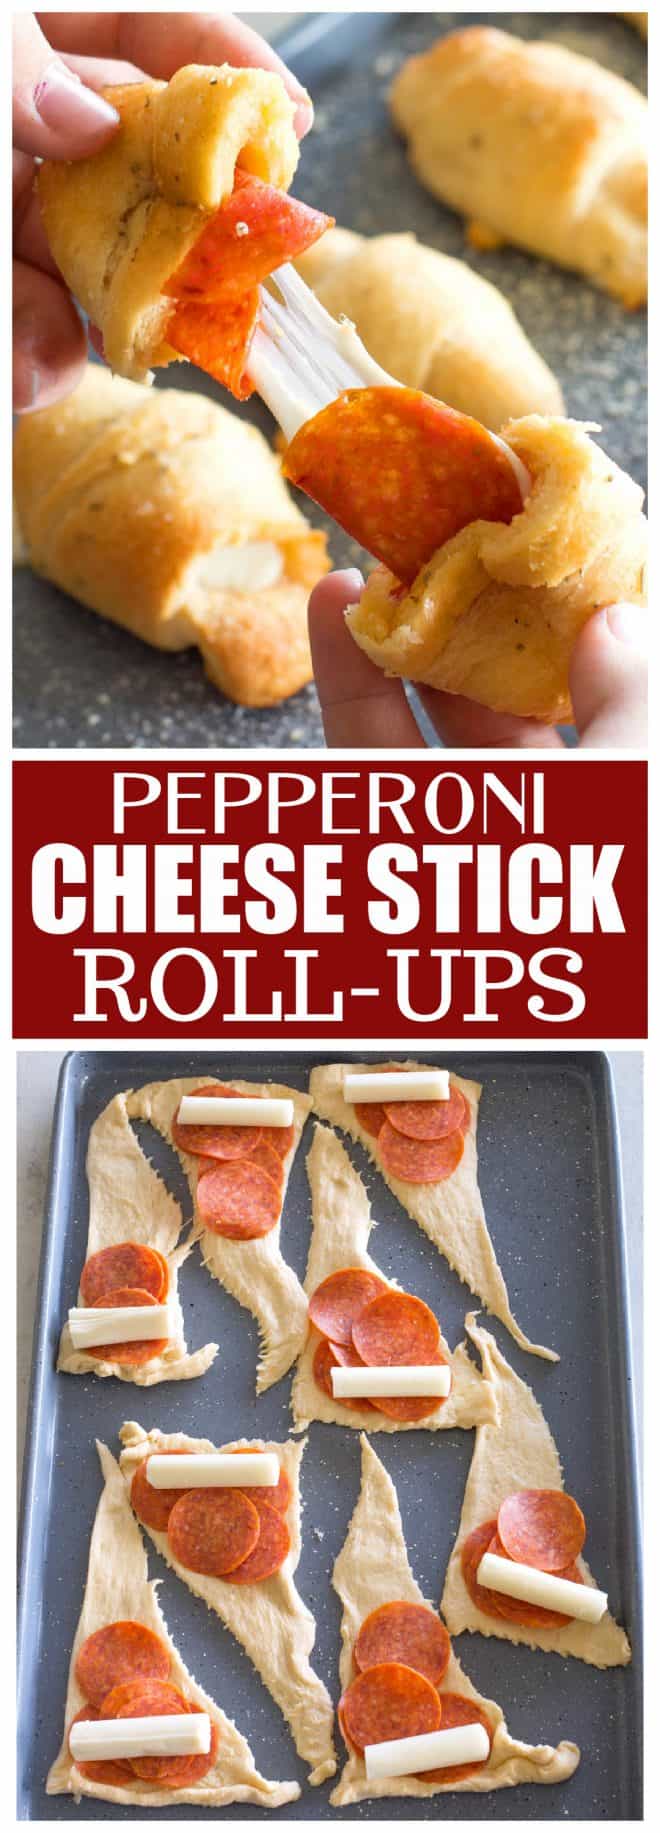 These Pepperoni Cheese Stick Roll Ups are great for kids and crowd pleasers. #pepperoni #cheese #stick #rollups #easy #recipe